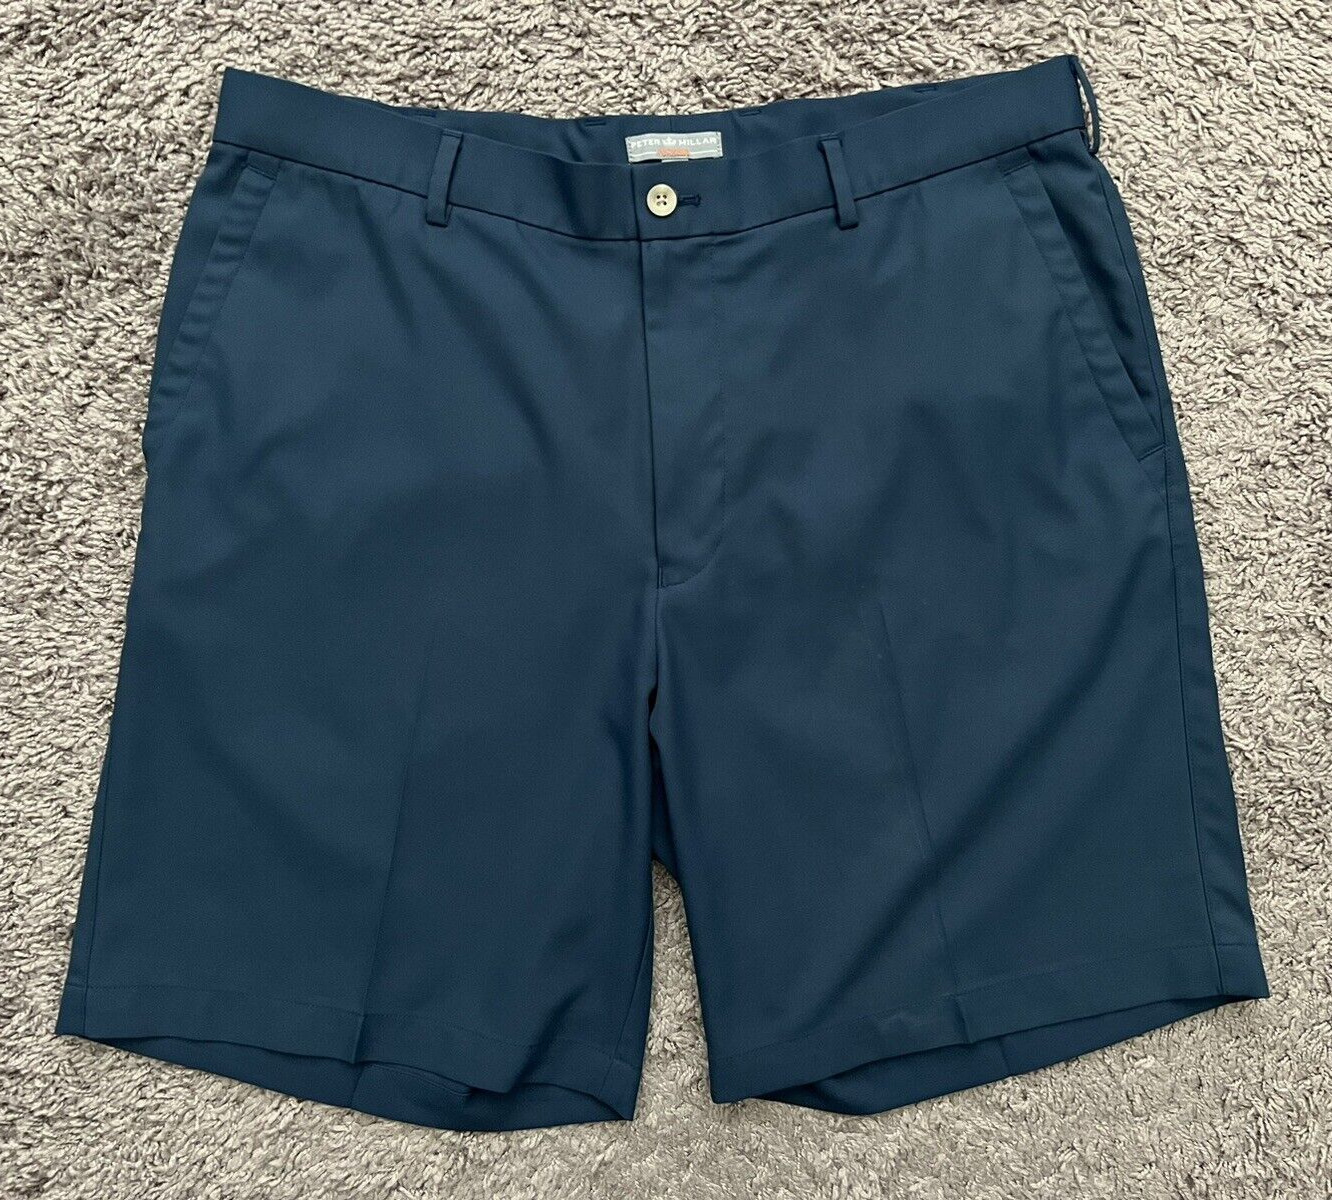 Peter Millar Crown Sport Wicking Blue Shorts 36 Men's Actual Size 35 Tiny Flaw